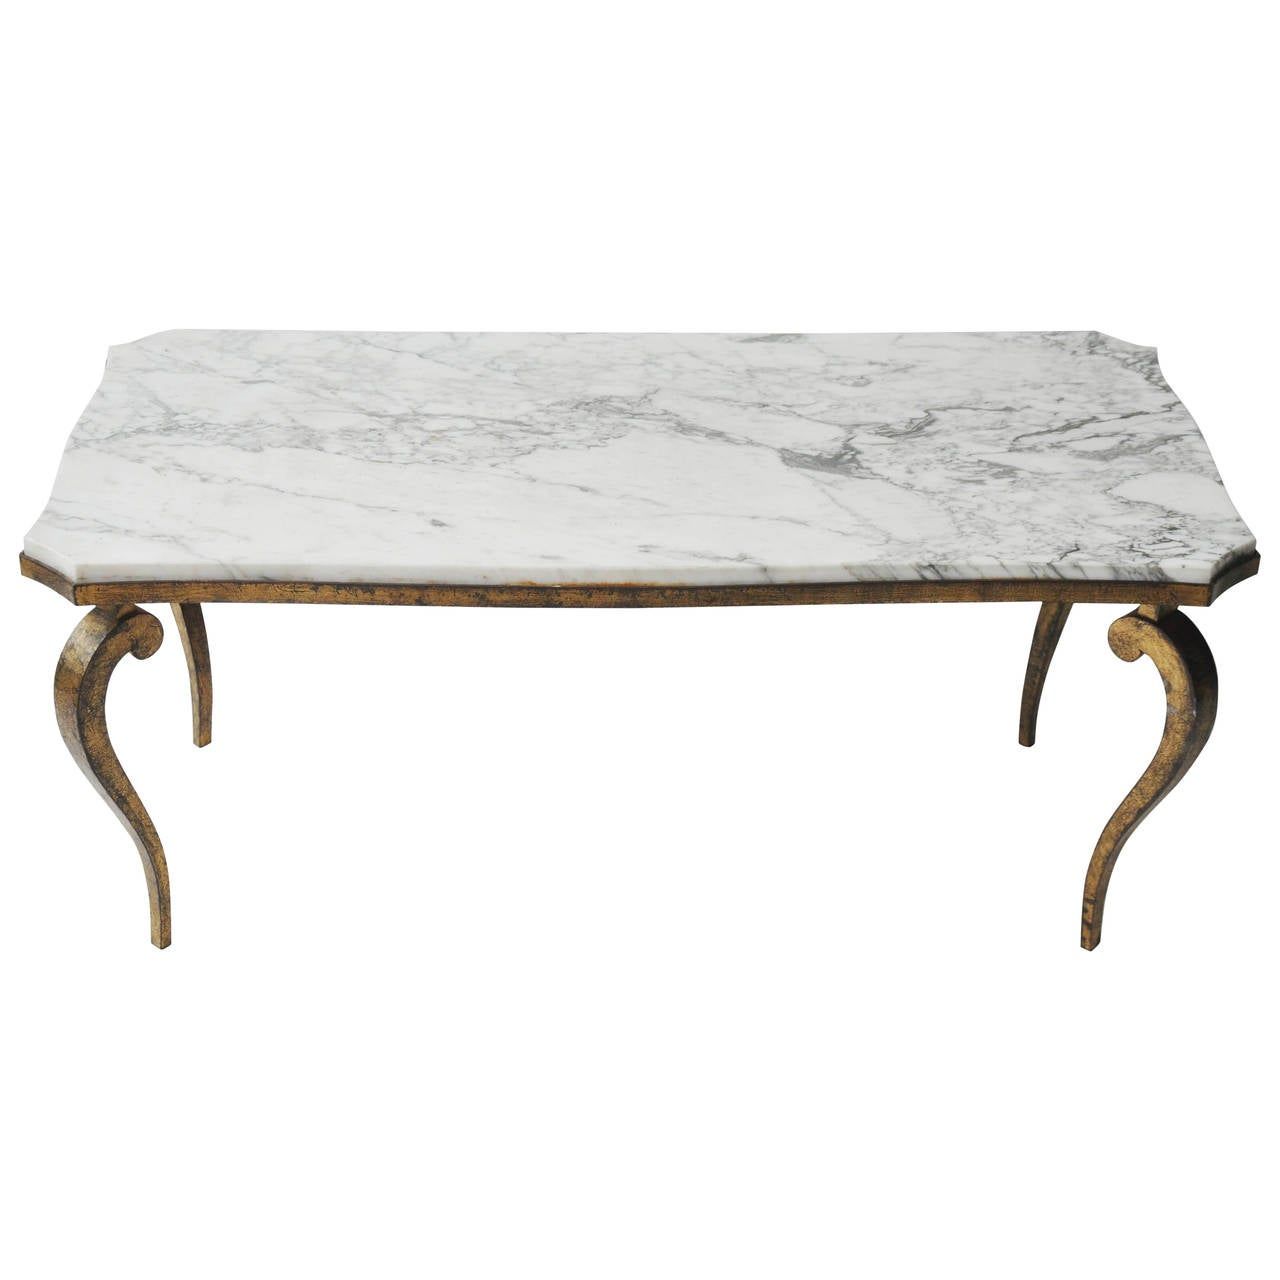 Marble And Gold Leaf Cabriole Leg Coffee Tableramsay Intended For Antiqued Gold Leaf Coffee Tables (View 8 of 15)